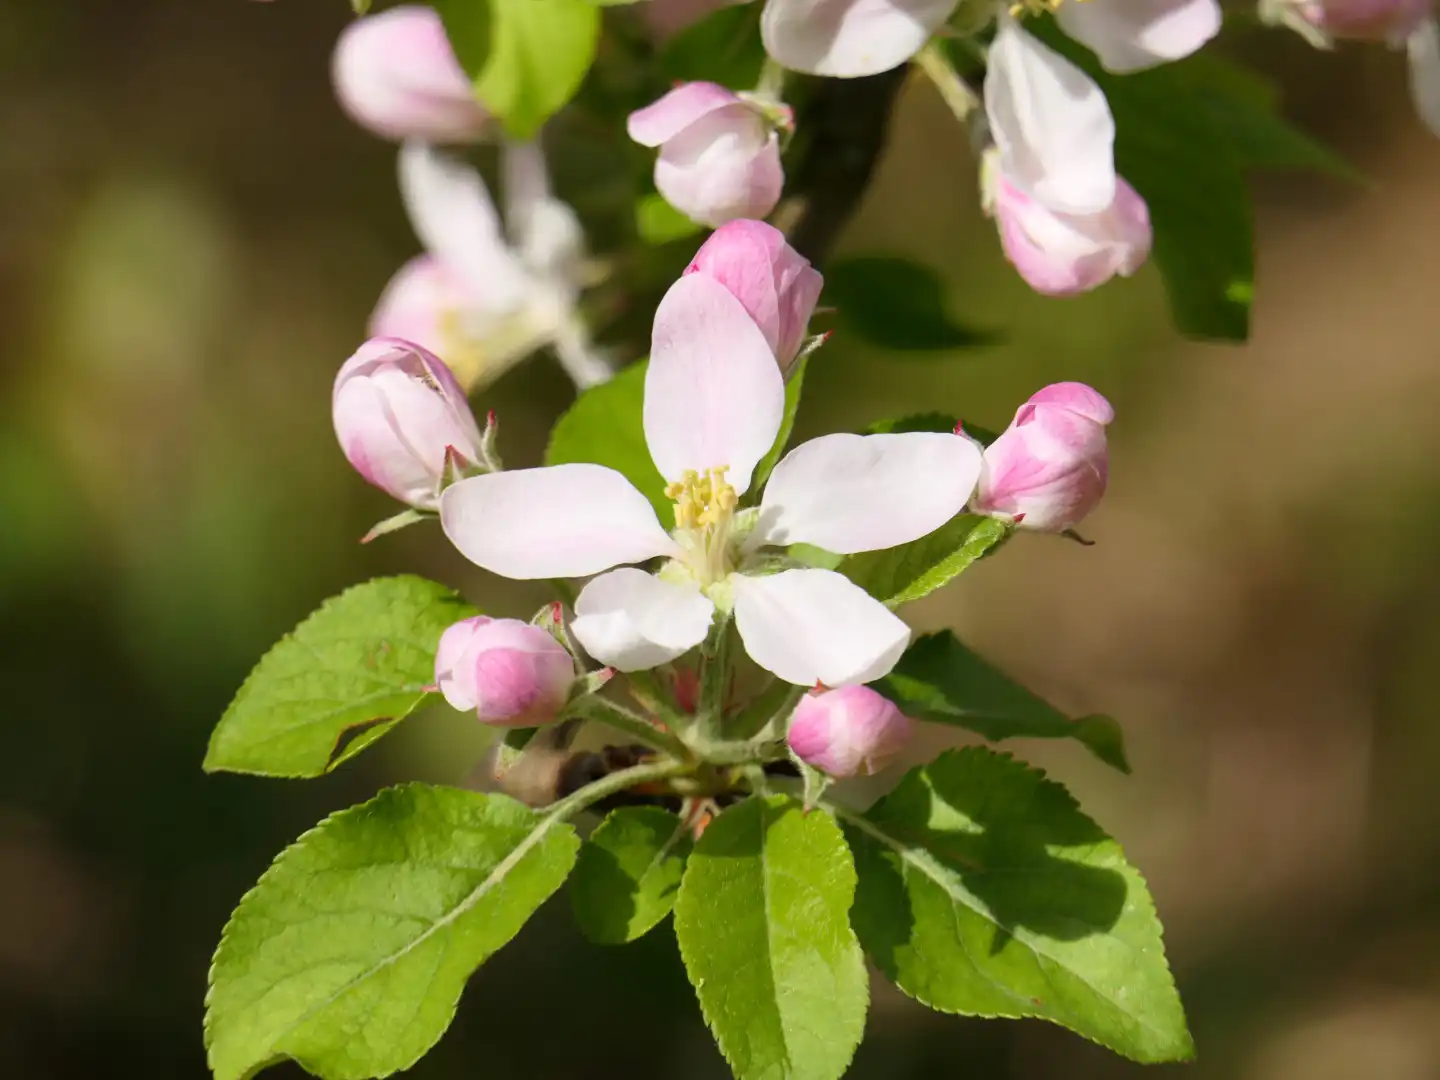 Spring, apple blossoms